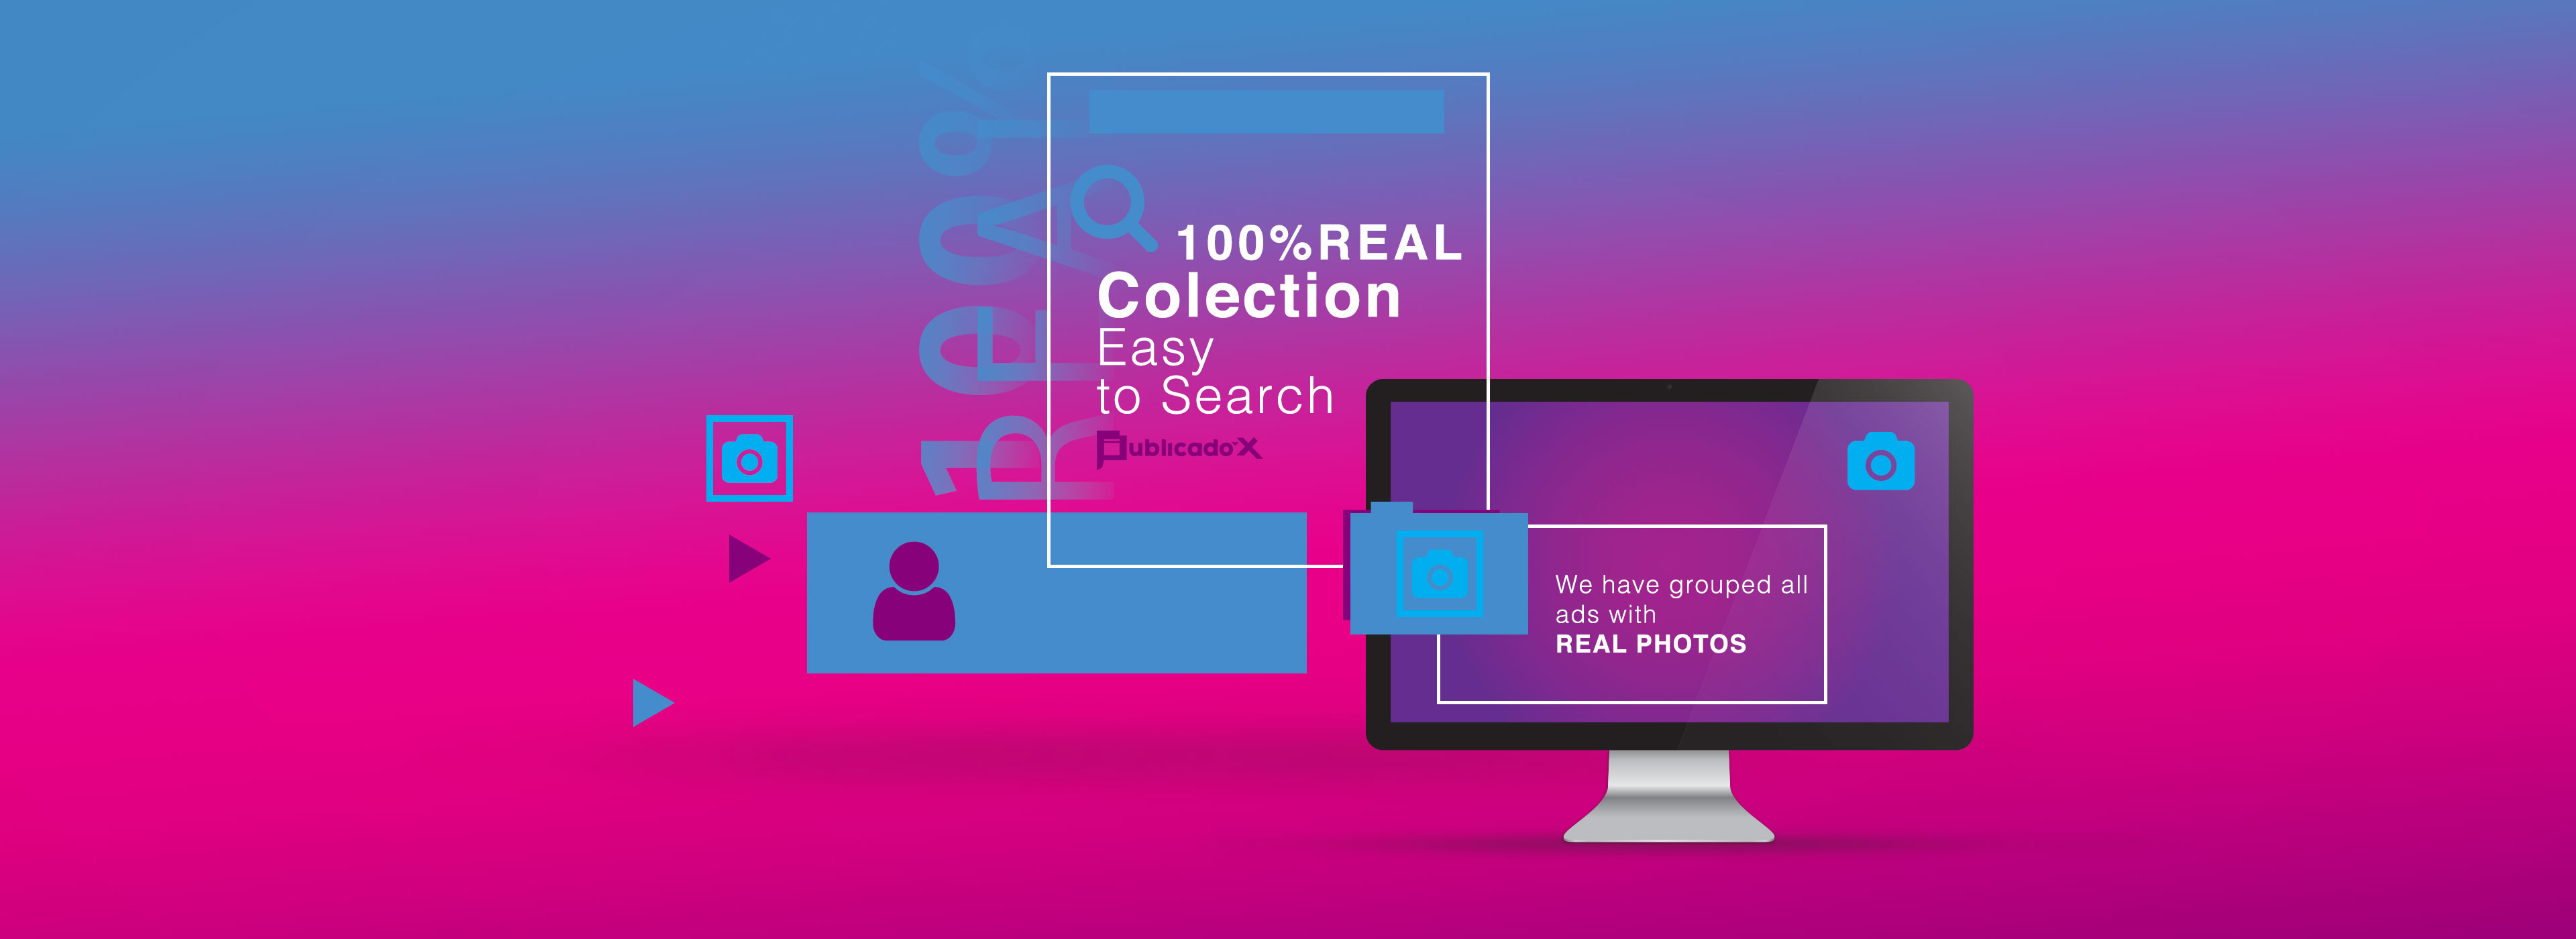 Your ad will appear on Homepage in a highlighted horizontal block. The 100% Real Collection has a prominent tab in the search menu where all advertisements with Real Photos corresponding to the searched category are listed.